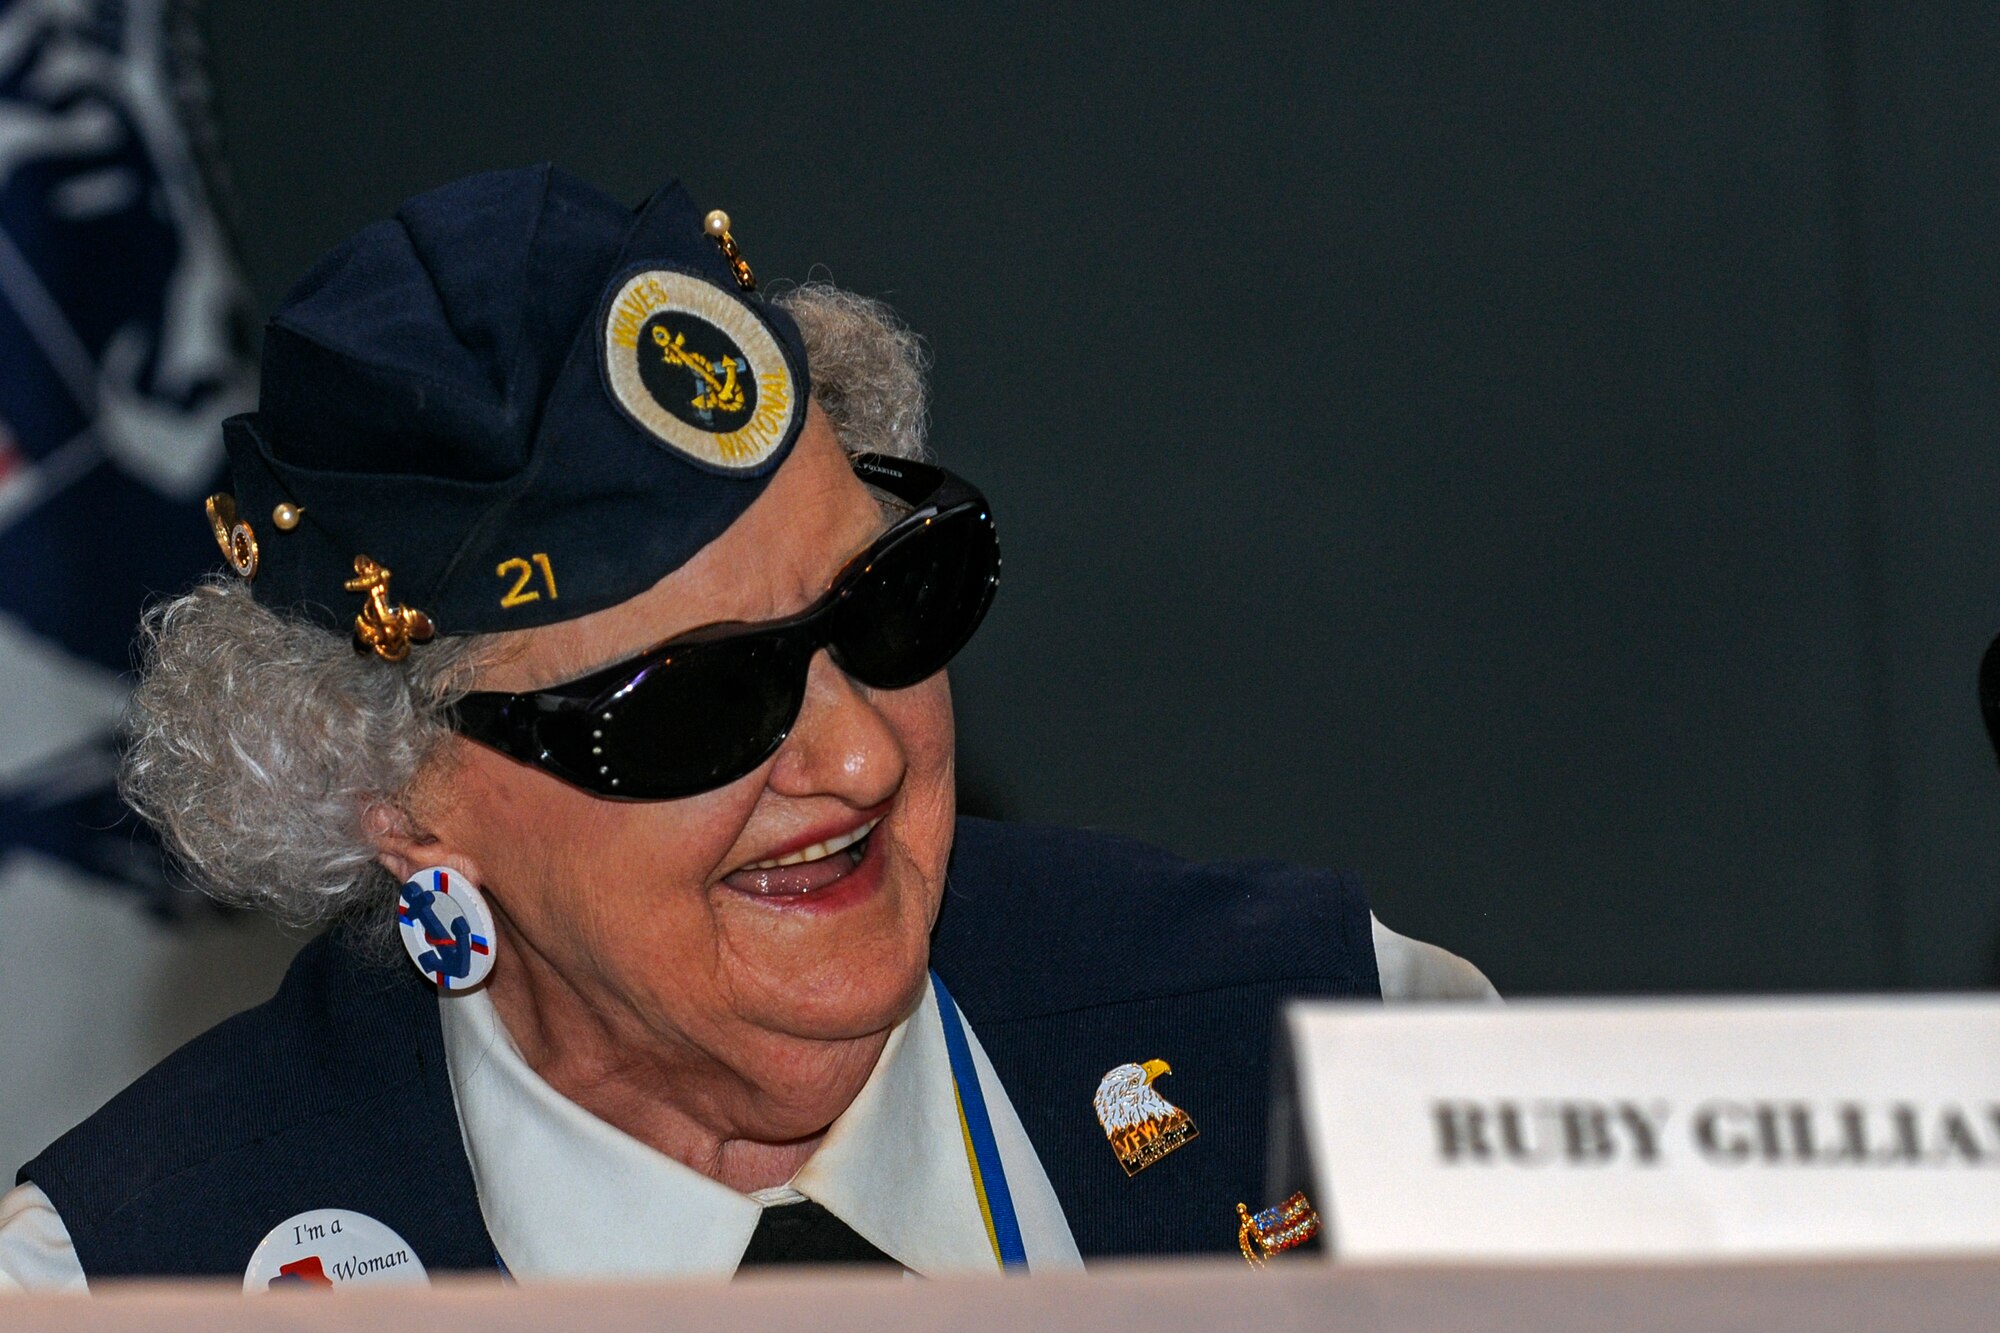 Ruby Gilliam, a World War II Veteran, participated in a Veterans panel discussion for women Mar. 10, 2017 at the Ohio History Center in Columbus, Ohio. The discussion was sponsored by the Ohio Department of Veterans Services in honor of Women's History Month. (U.S. Air National Guard photo by Senior Airman Wendy Kuhn)